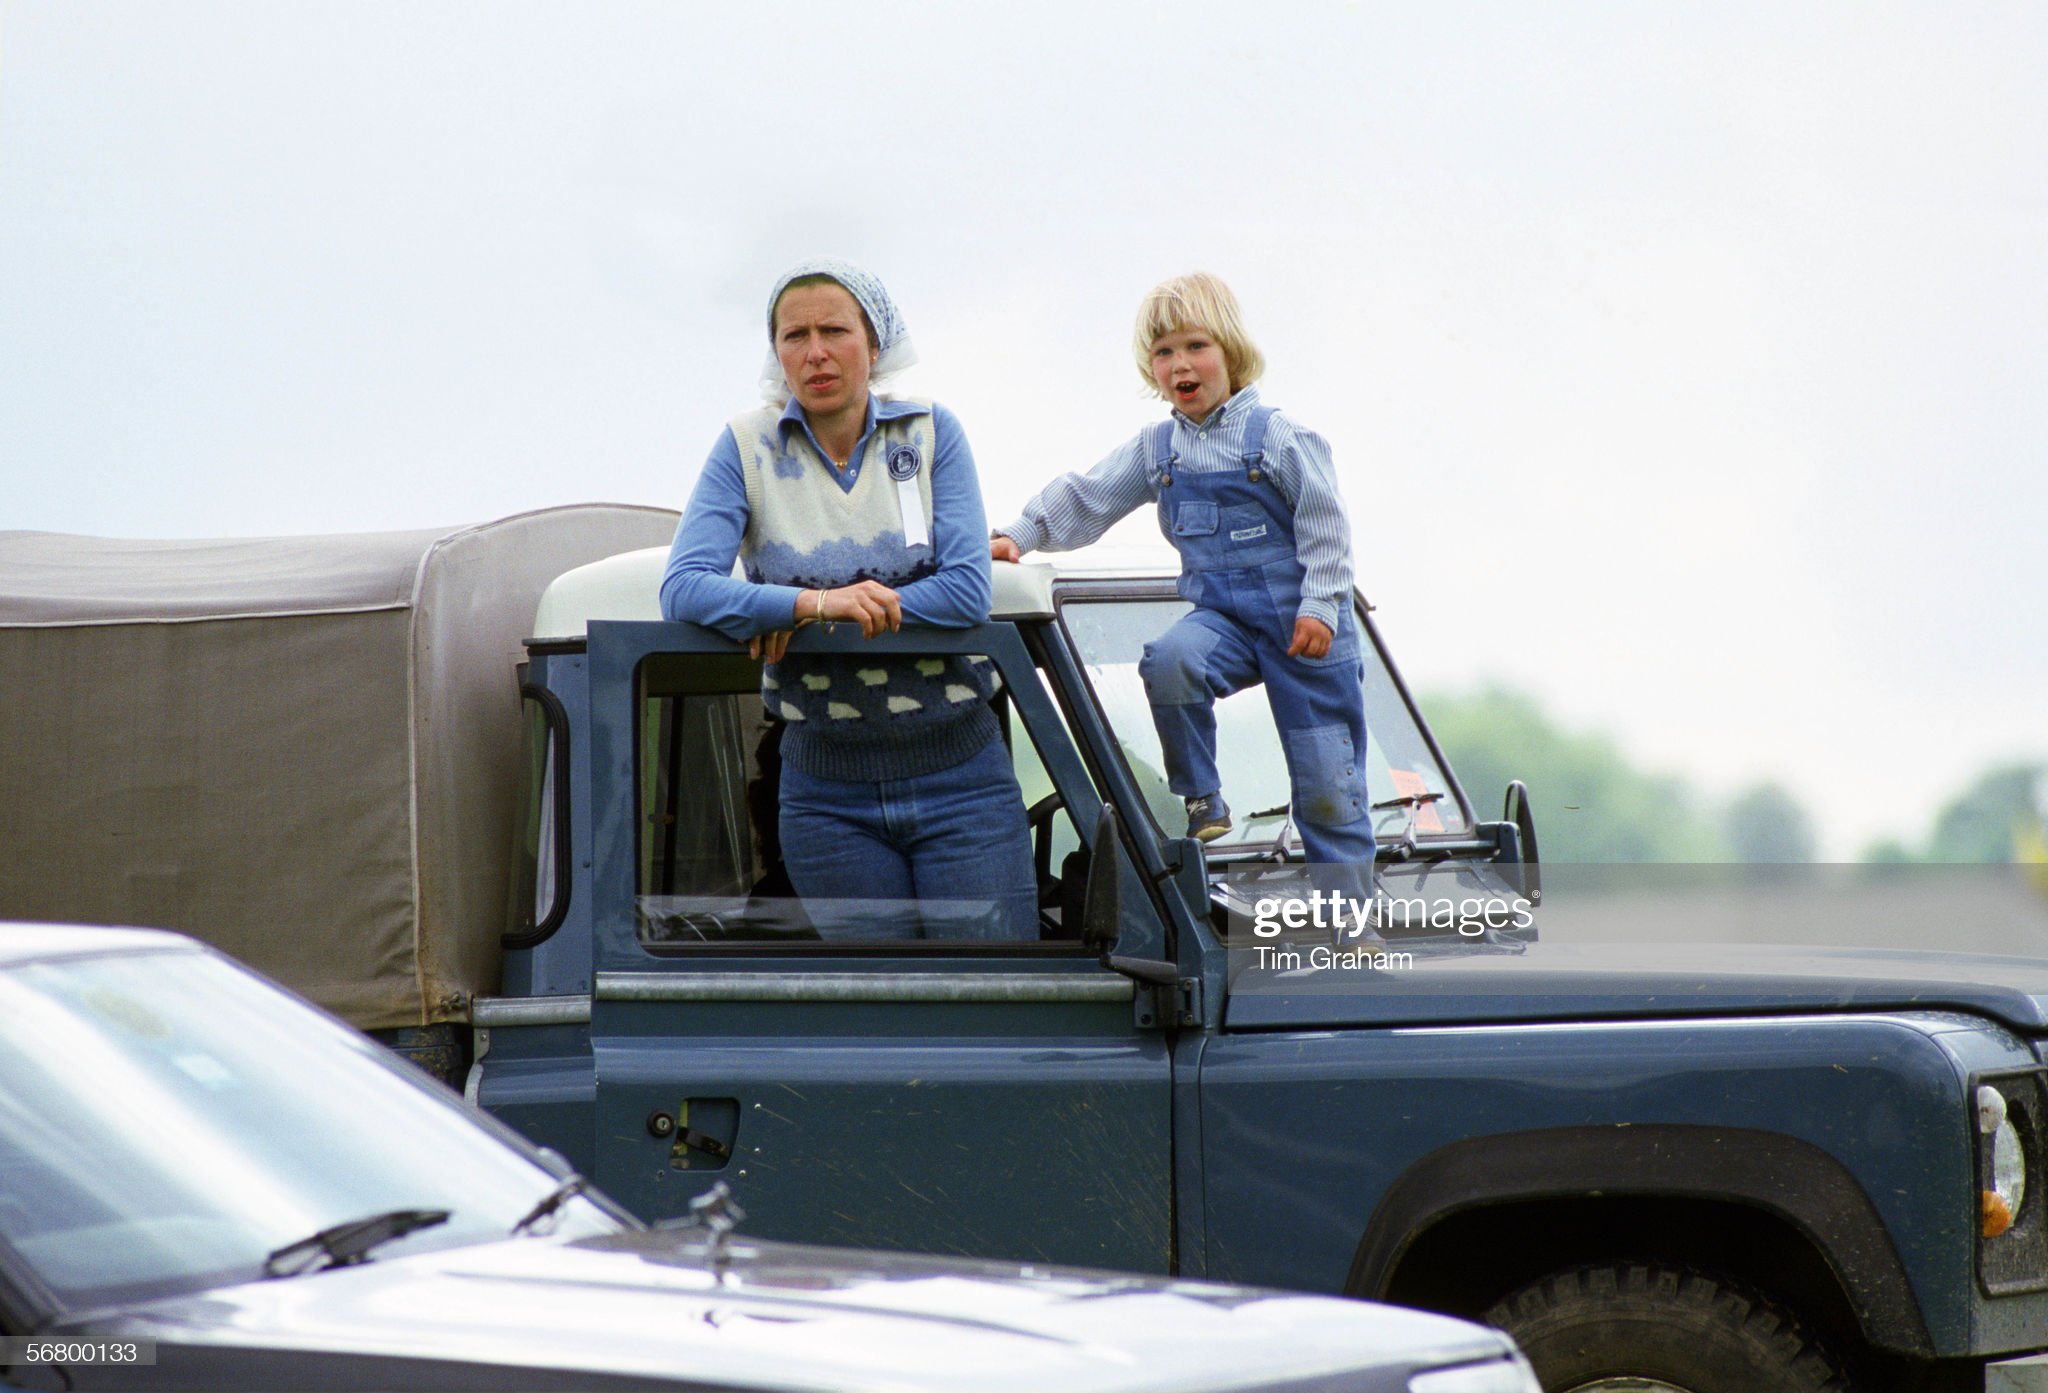 Zara Phillips with her mother, Princess Anne, at the Windsor Horse Show with their Land Rover 4-wheel drive vehicle on May 25, 1985.